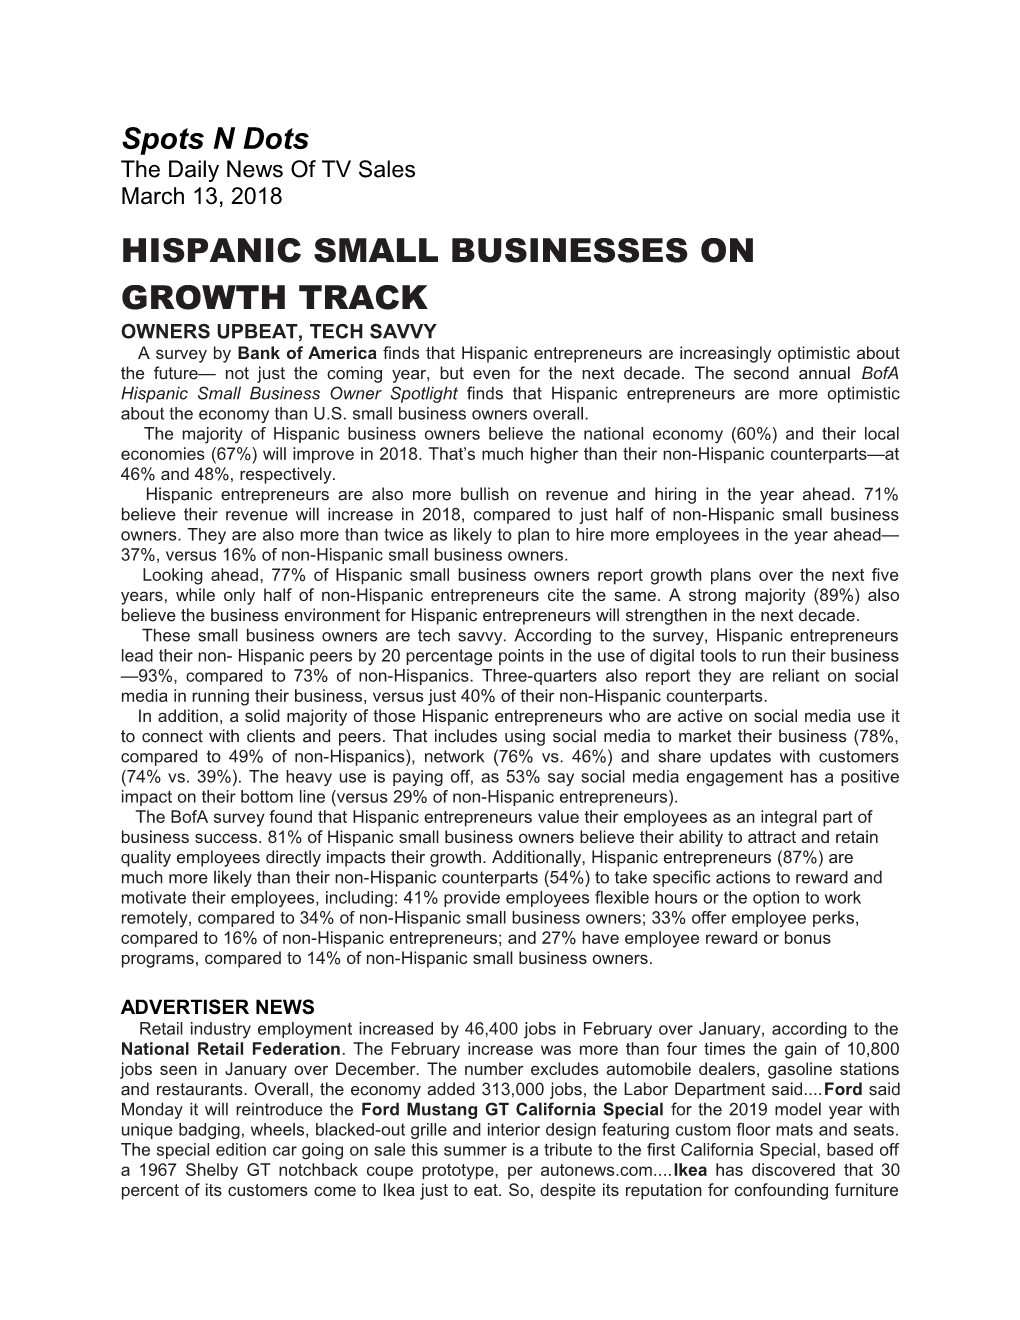 Hispanic Small Businesses on Growth Track